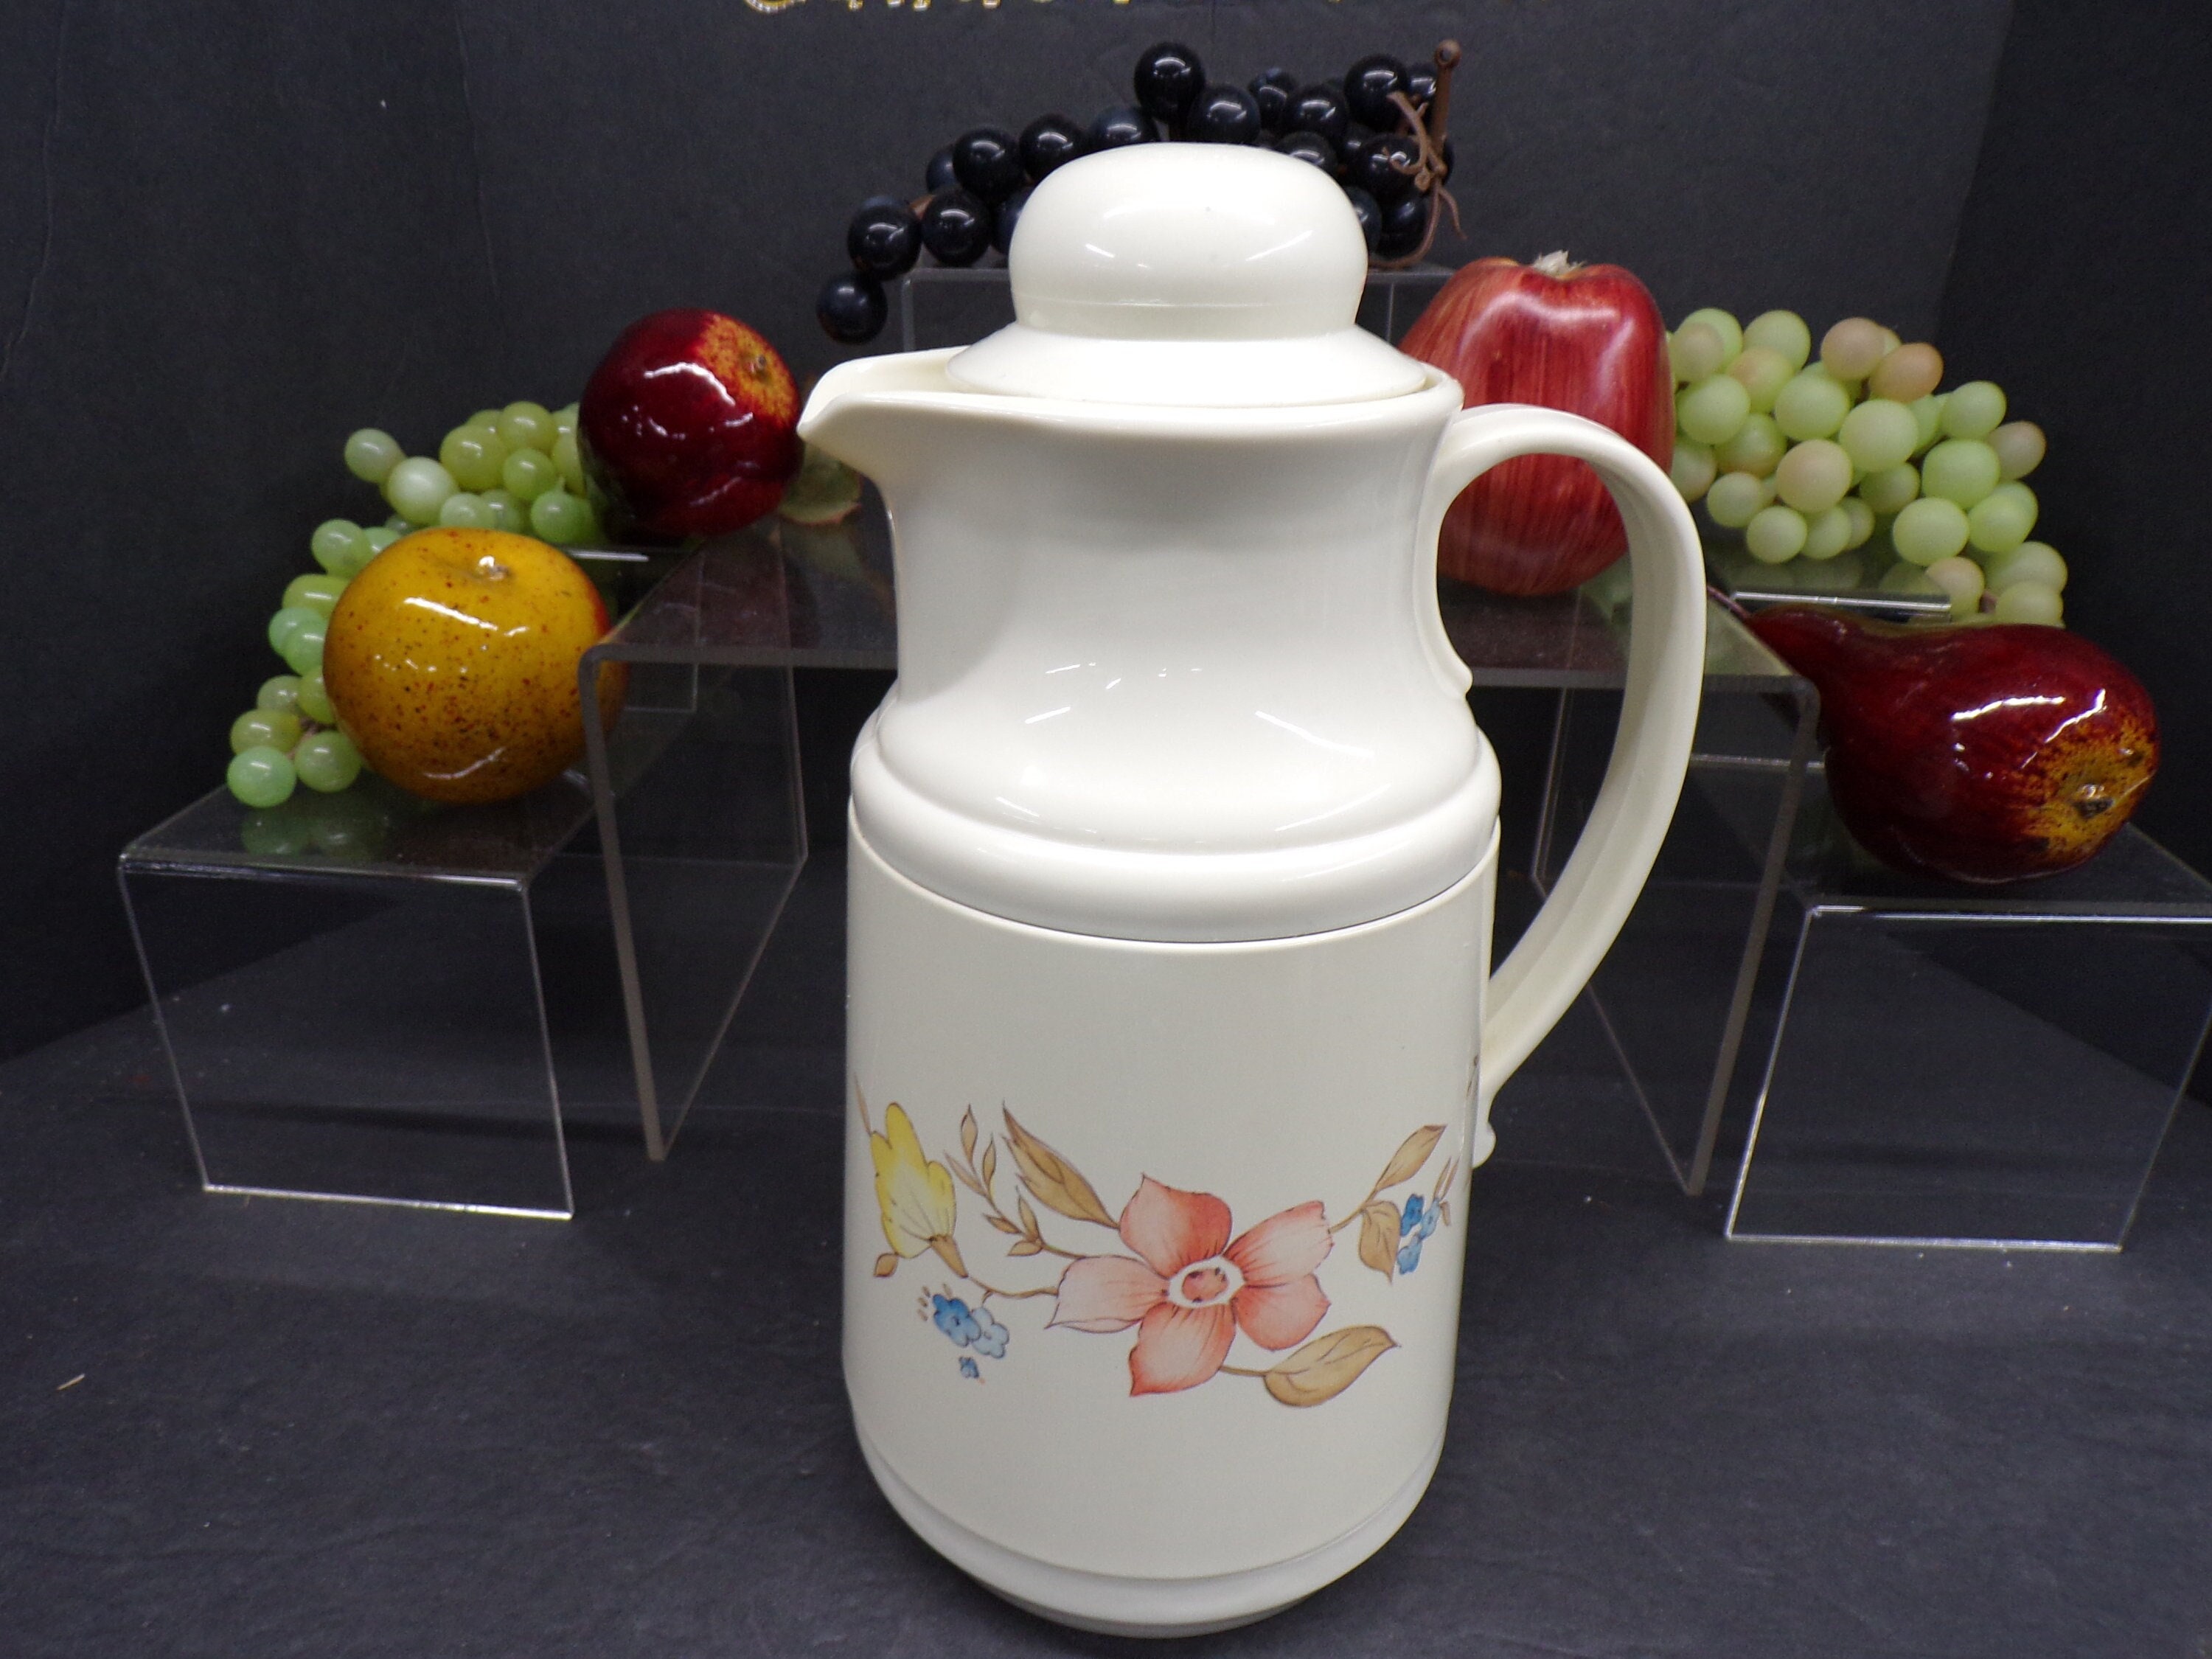 Vintage Phoenix Thermal Insulated Carafe Coffee Pitcher Hot Tea - Screw Top